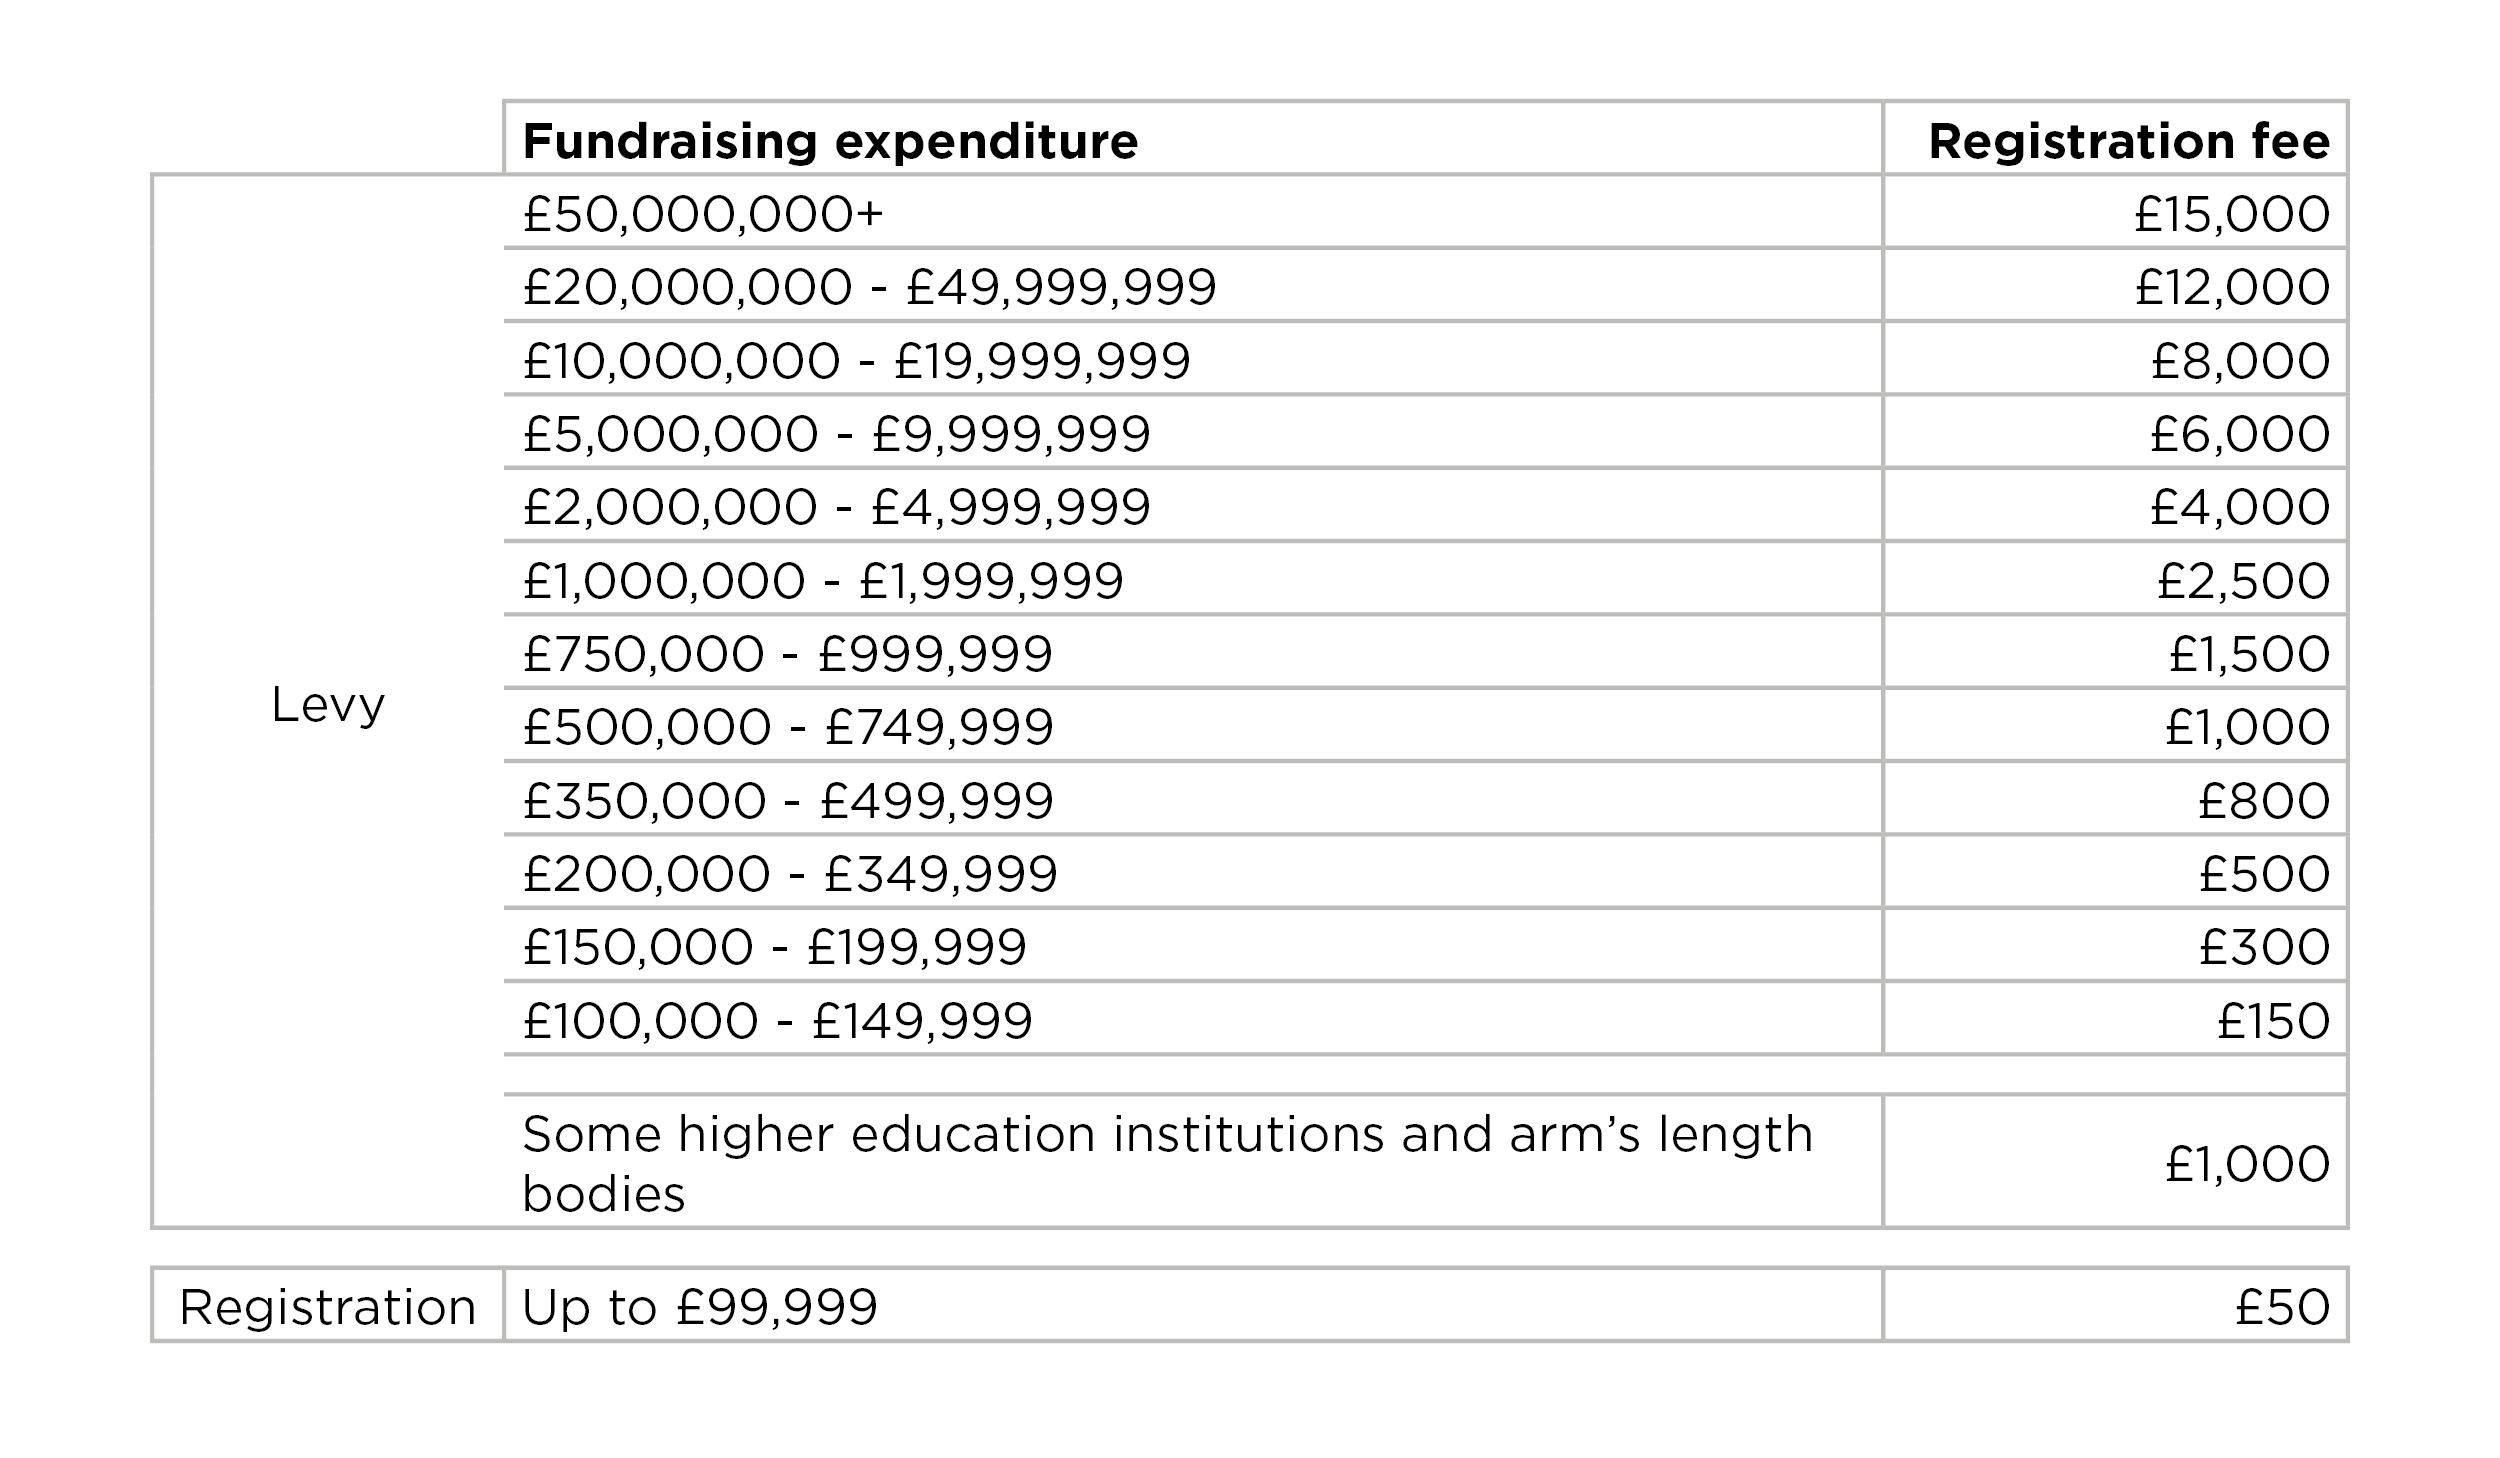 Table showing charity registration fee bands